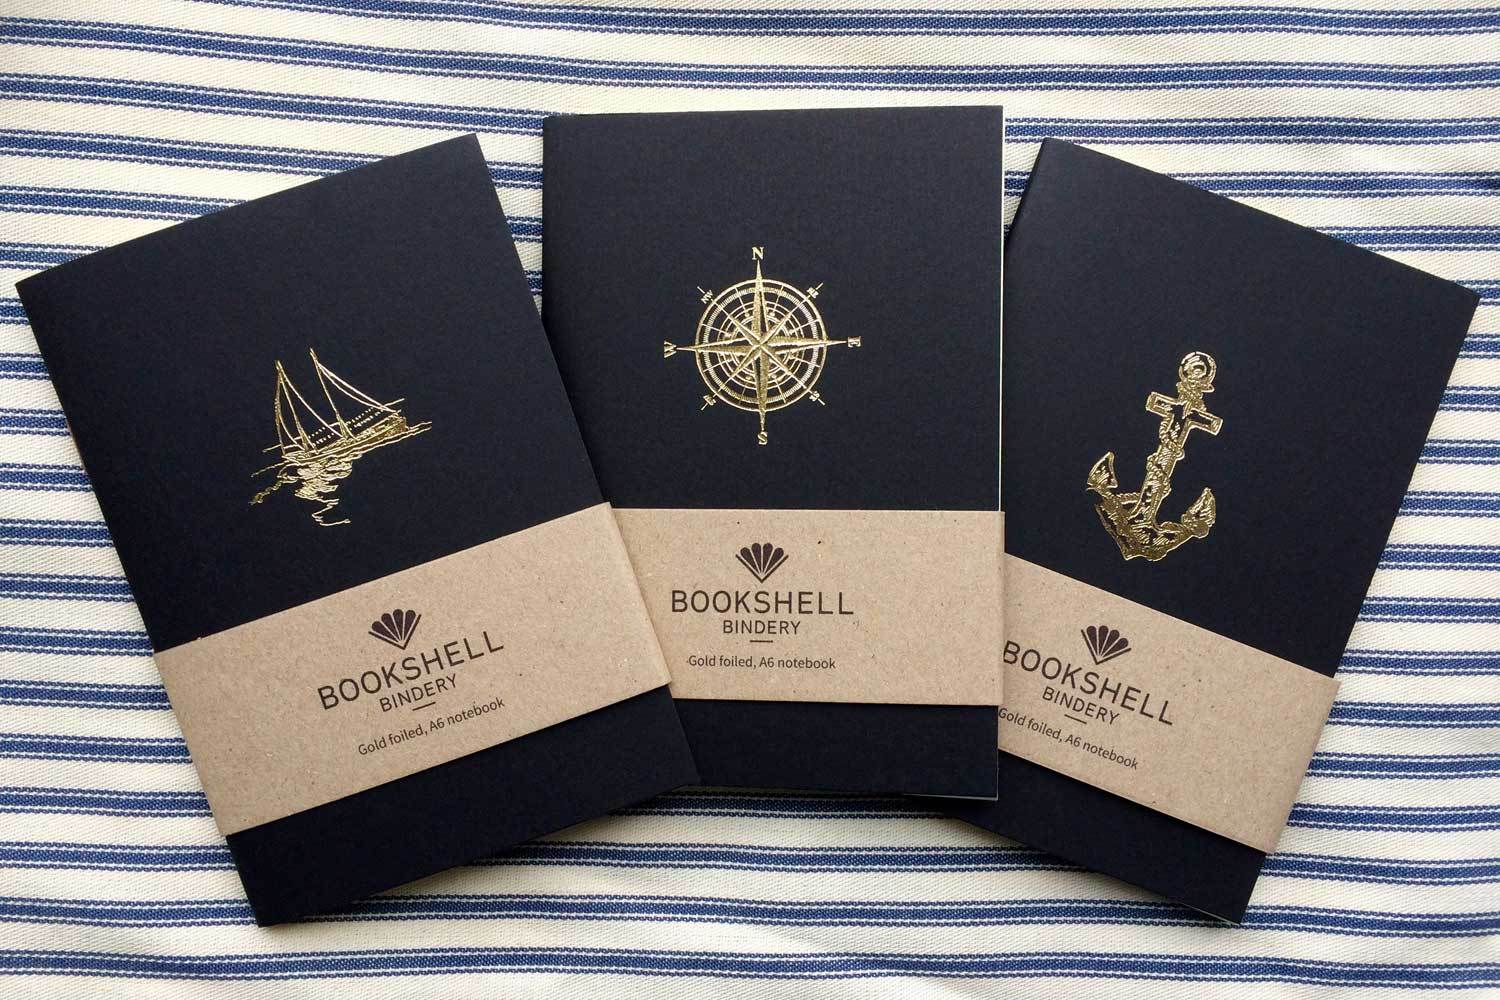 Pocket notebook with choice of gold foil picture from Bookshell, boat, compass or anchor